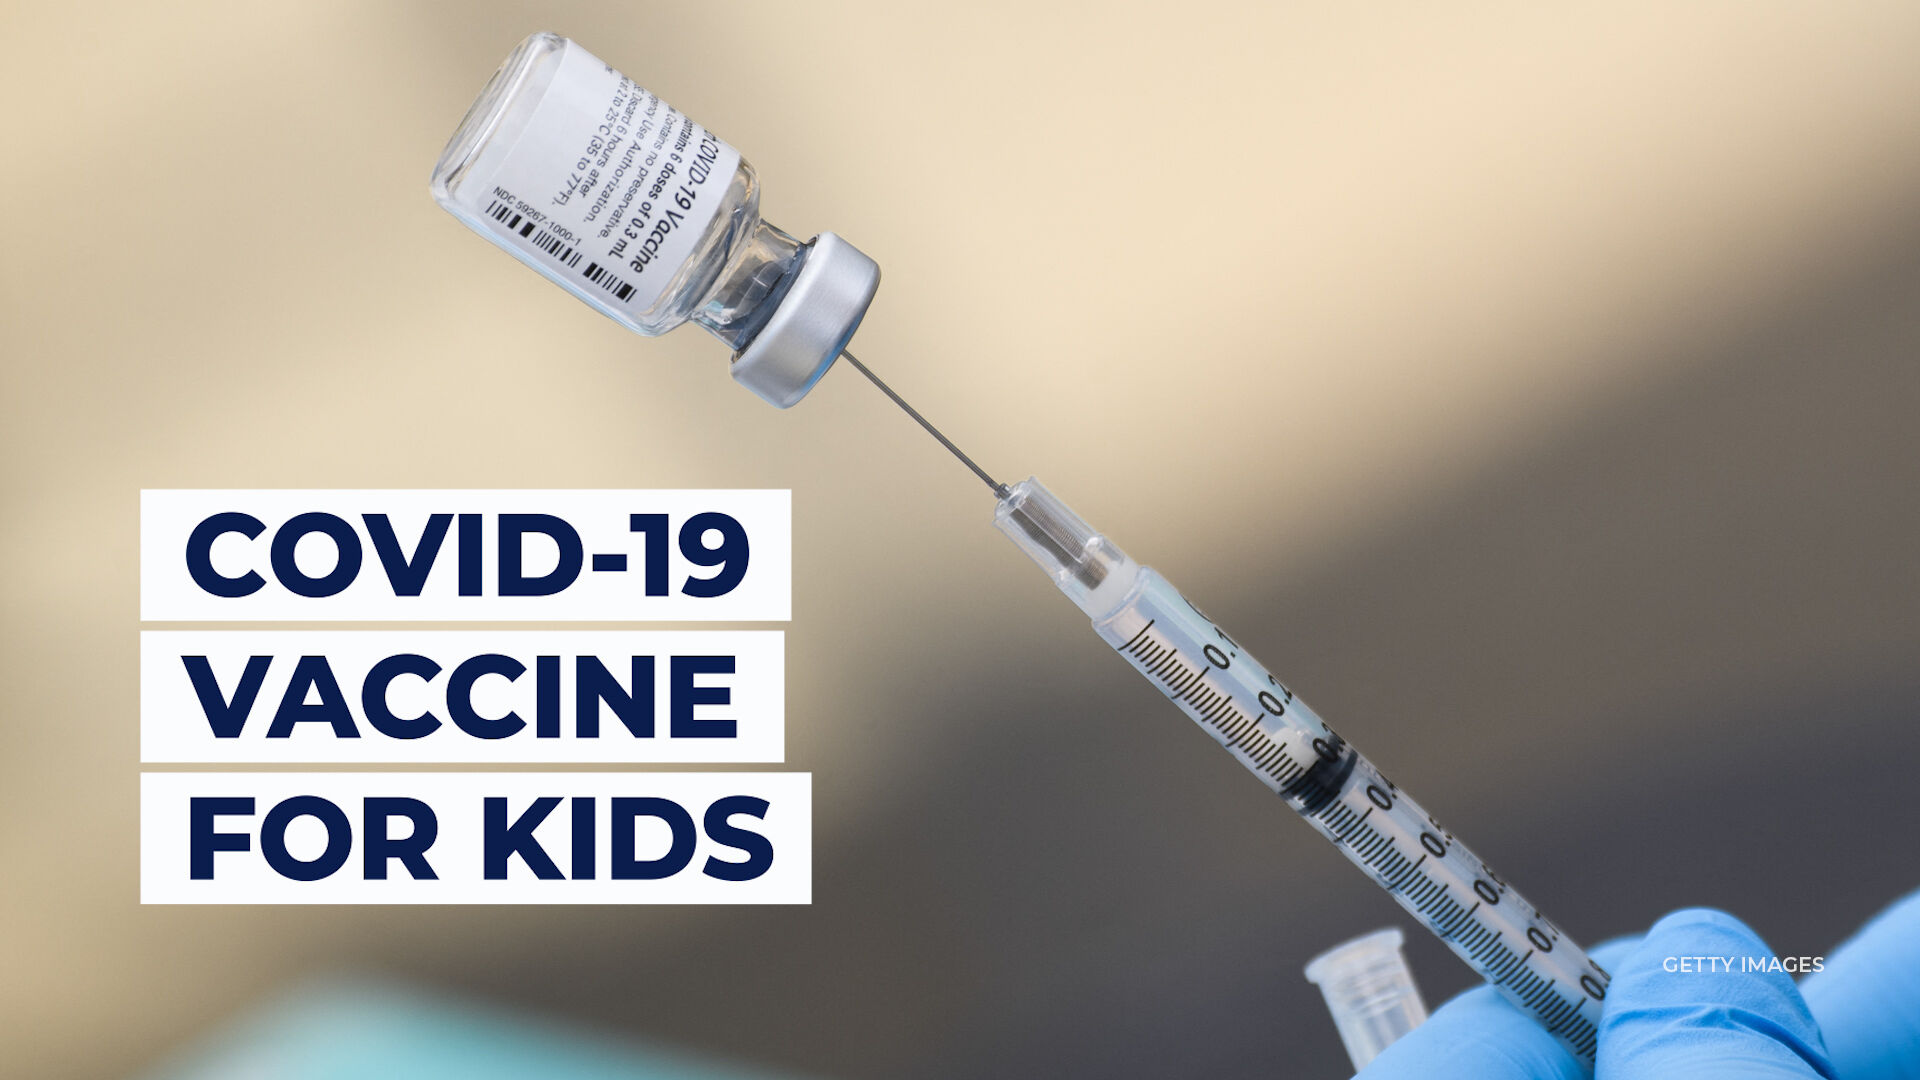 The White House announced its plan to vaccinate kids aged 5-11 against COVID-19.